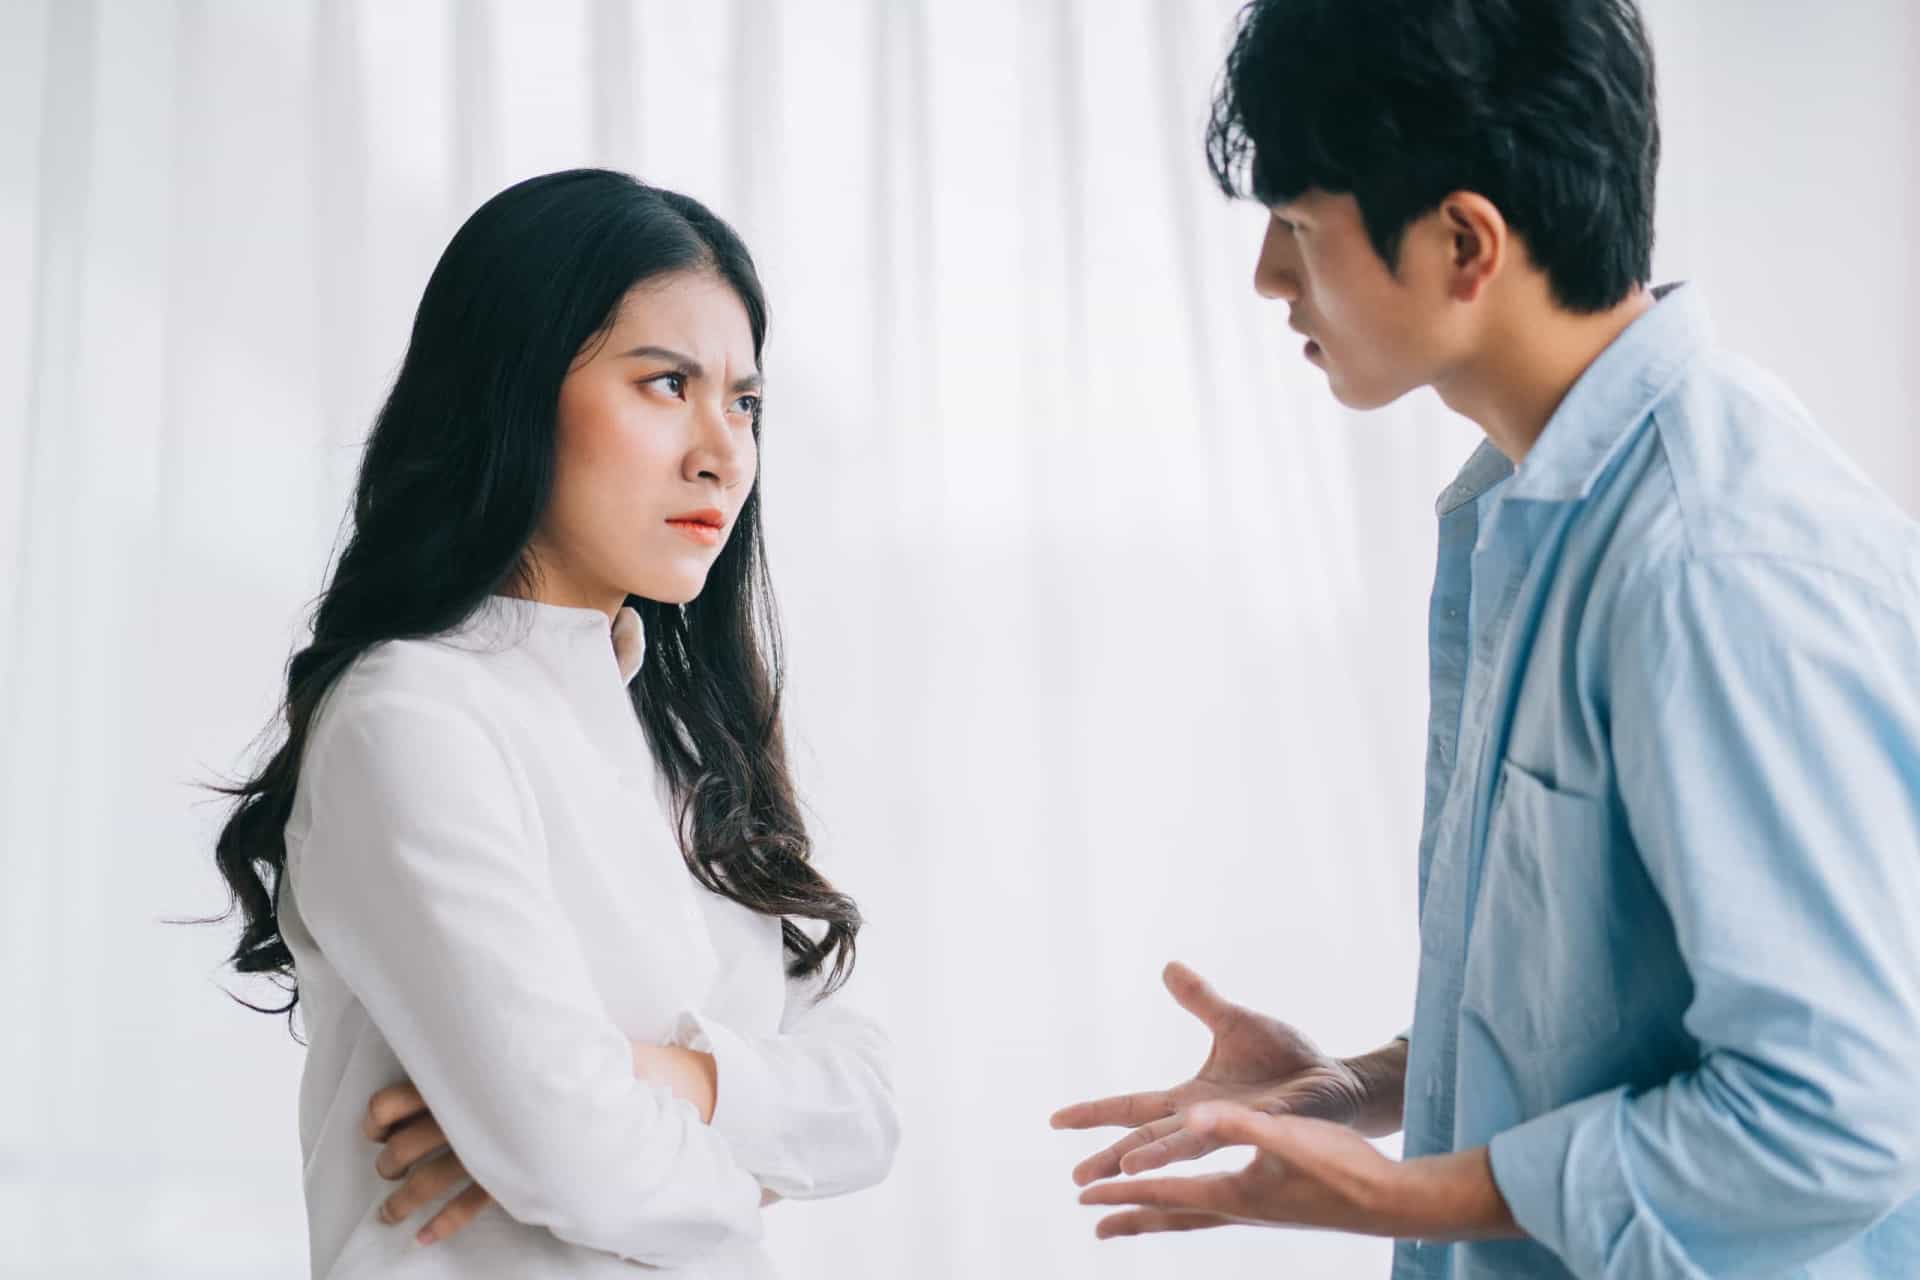 <p>When you keep blaming and recalling mistakes, then you're keeping a scoreboard. This only leads to anger and bitterness. If you want to save the relationship, speak your mind and don't build up the issues for later. </p><p><a href="https://www.msn.com/en-us/community/channel/vid-7xx8mnucu55yw63we9va2gwr7uihbxwc68fxqp25x6tg4ftibpra?cvid=94631541bc0f4f89bfd59158d696ad7e">Follow us and access great exclusive content everyday</a></p>